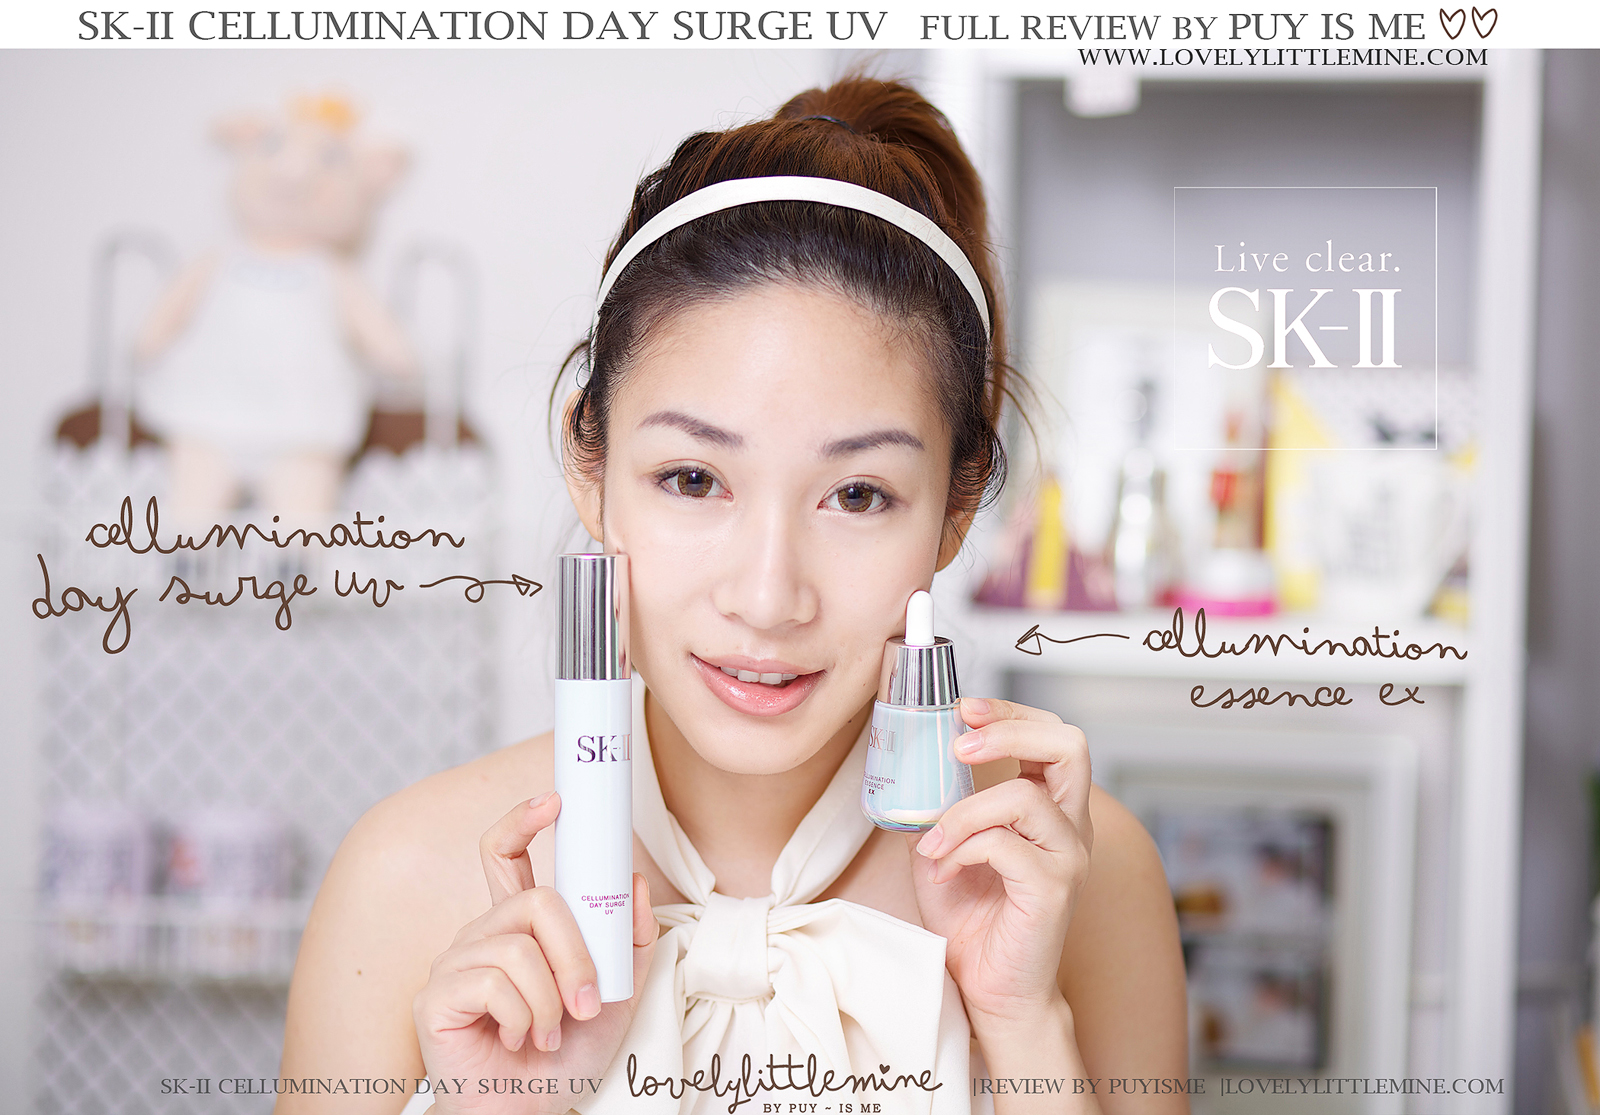 //lovelylittlemine.com/wp-content/uploads/2013/03/SKII-Review-by-PuYisme-Cover.jpg